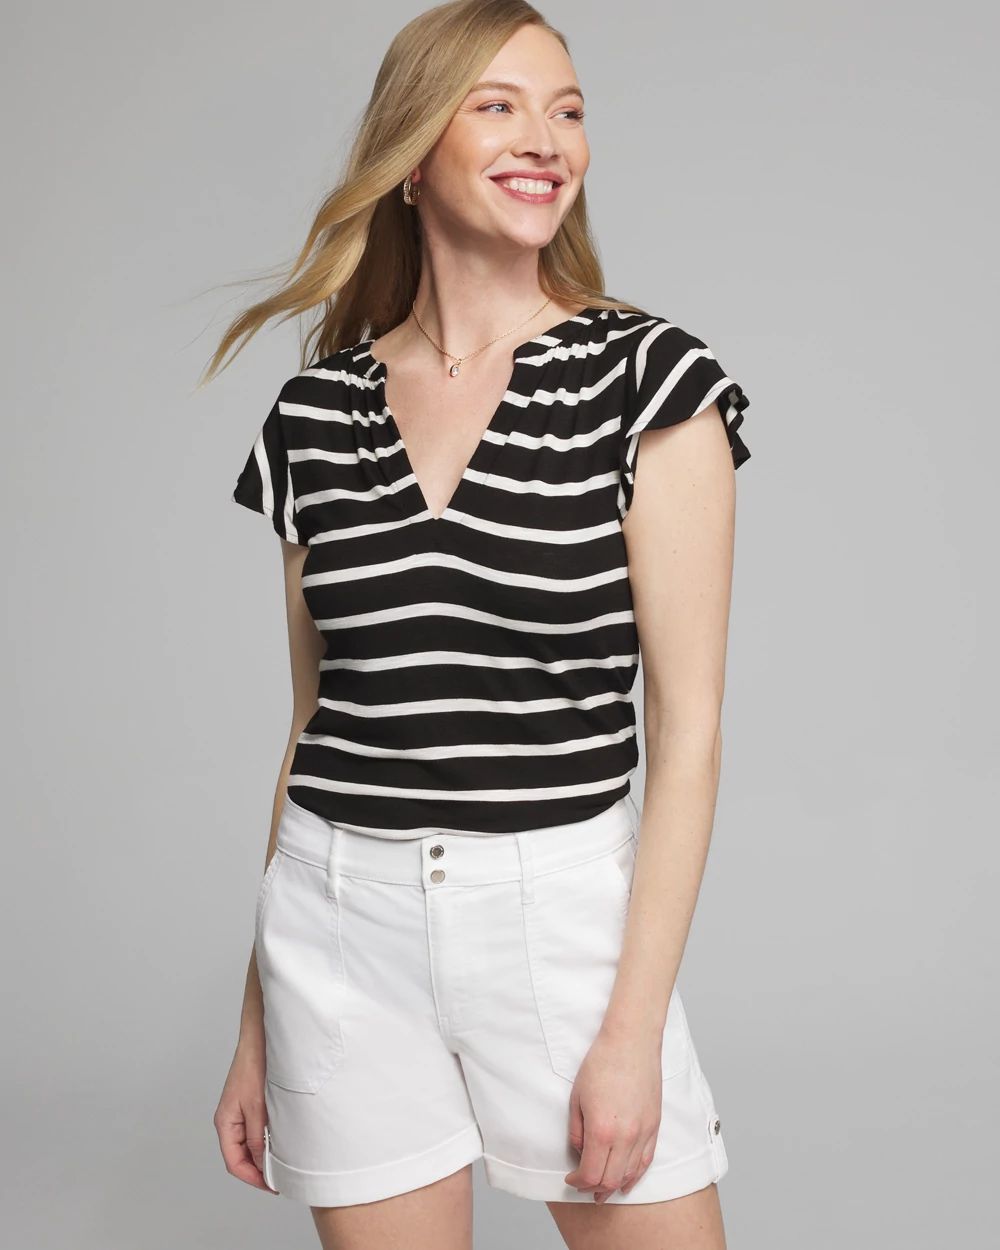 Outlet WHBM Notch Neck Ruffle Tee